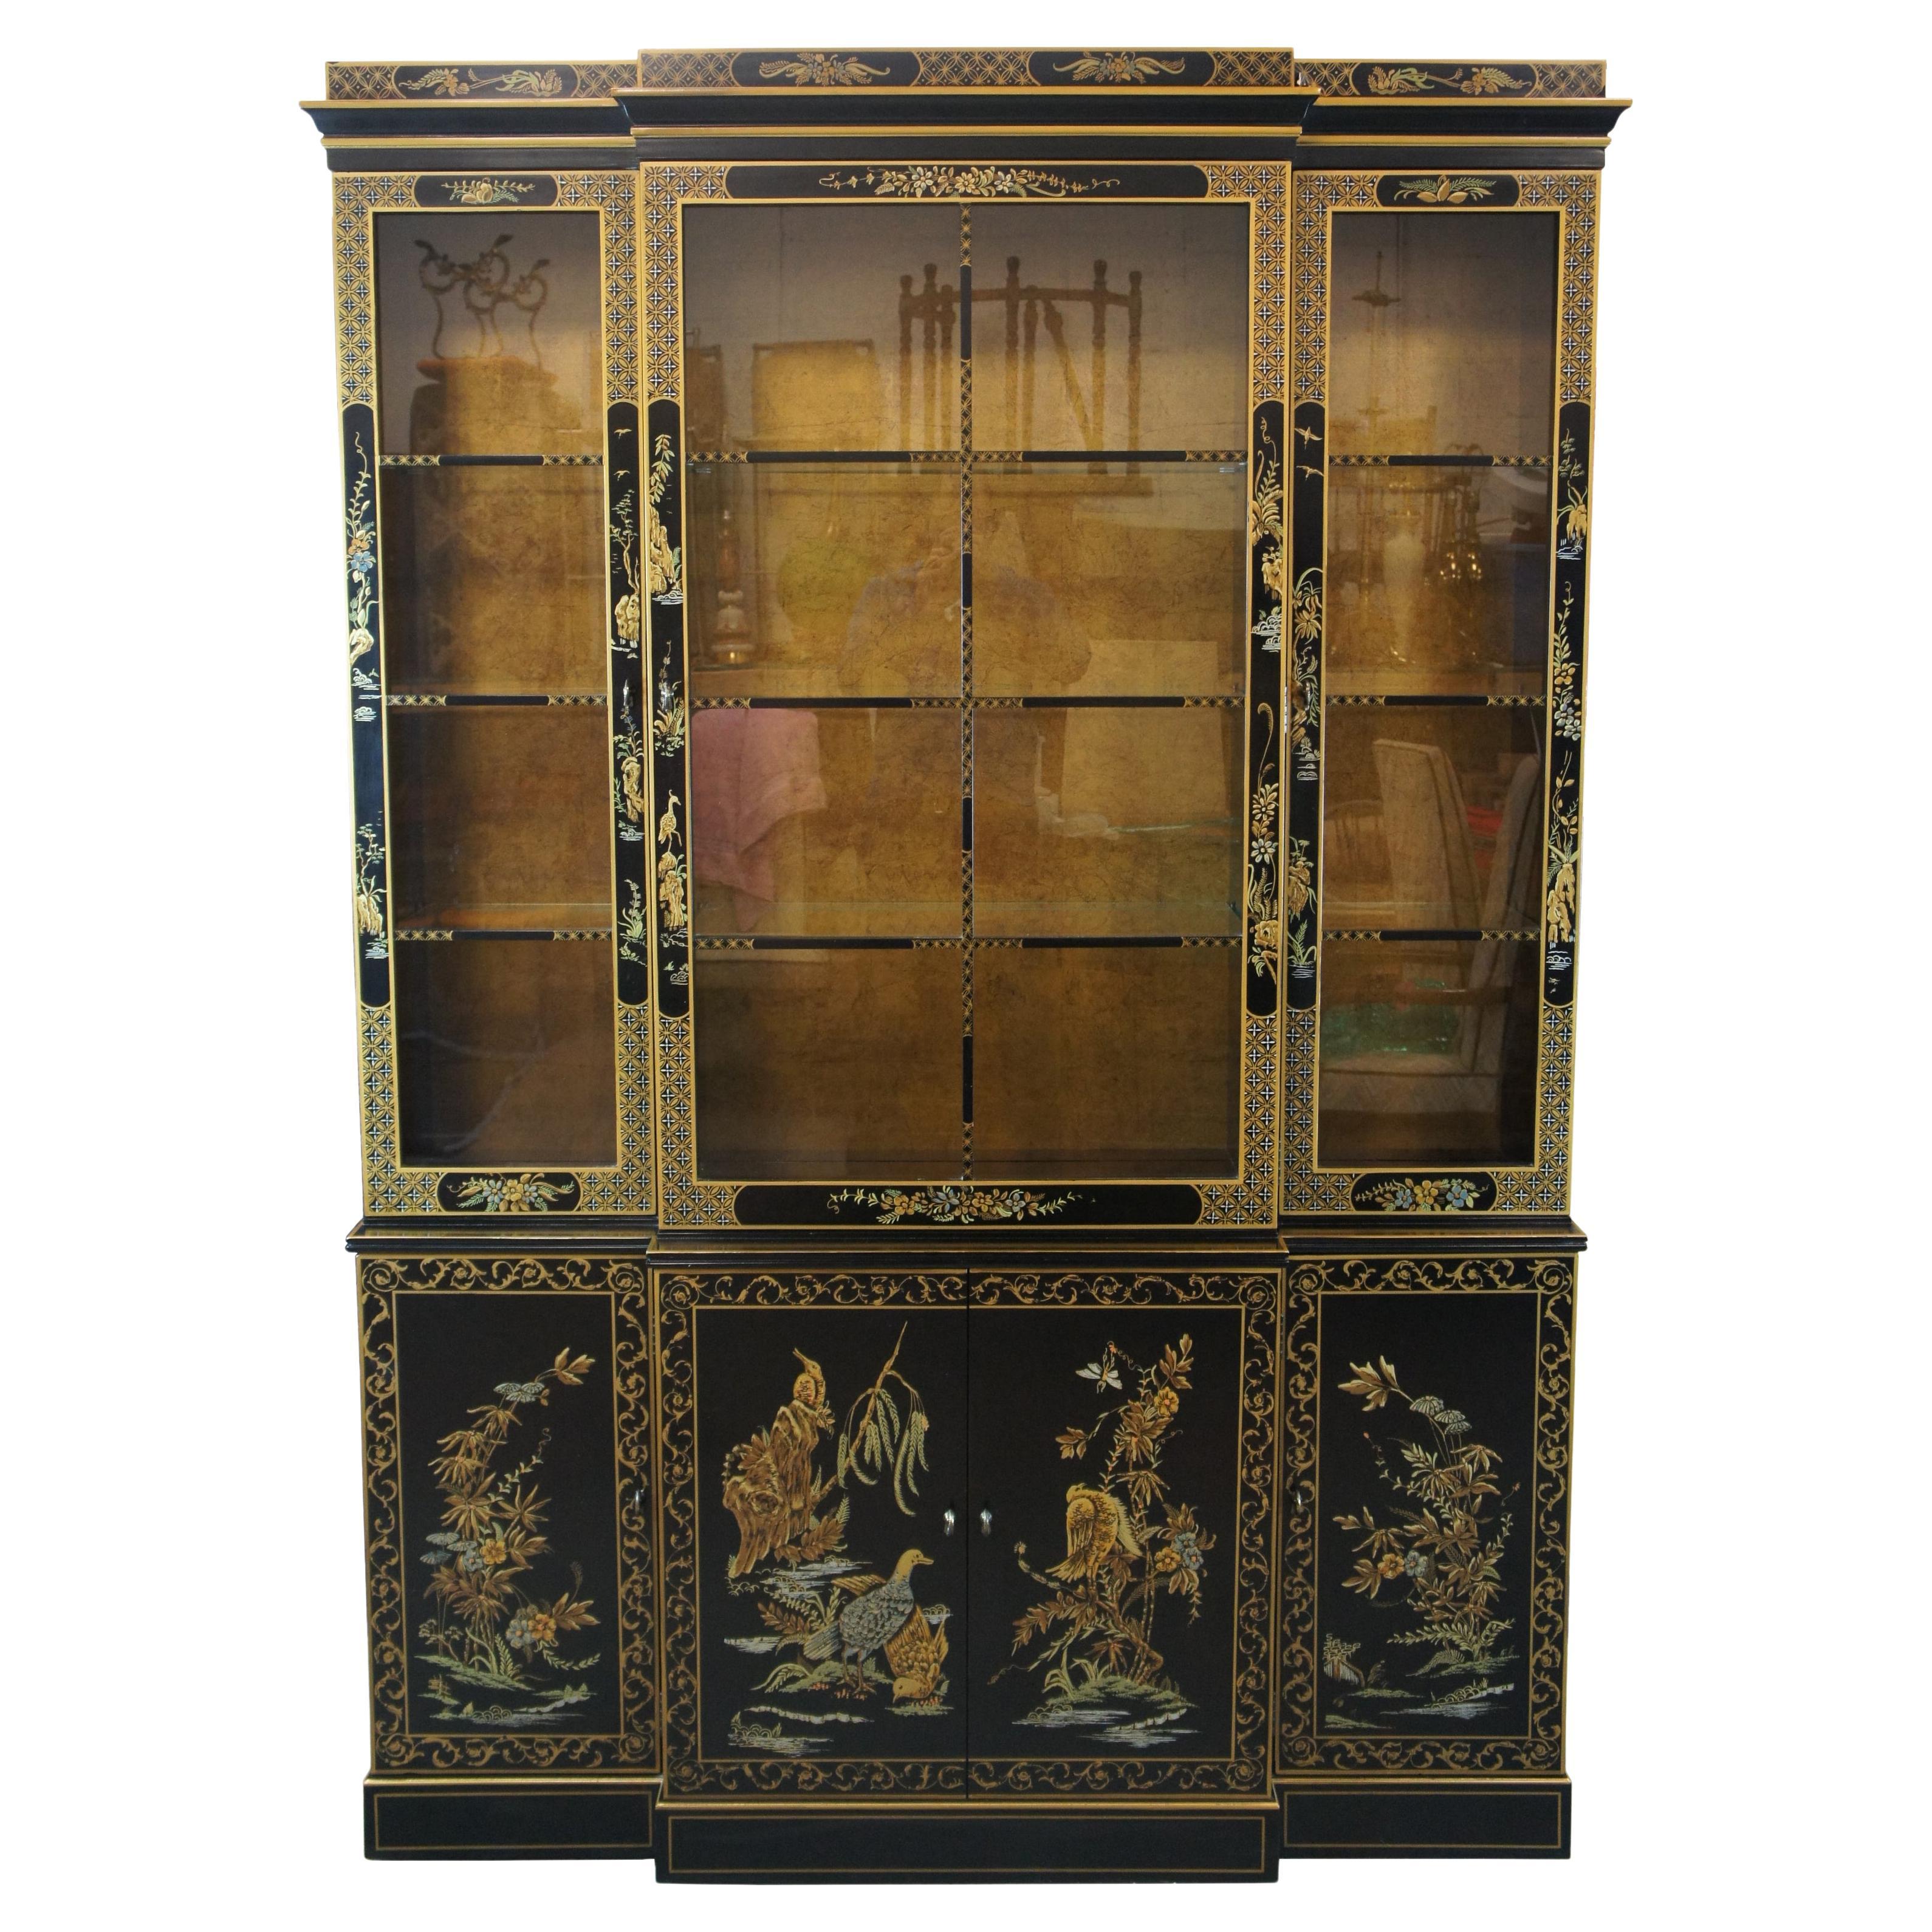 Drexel Heritage Et Cetera Chinoiserie Black Lacquer Breakfront China Cabinet  78' at 1stDibs | drexel et cetera chinoiserie, drexel heritage chinoiserie,  et cetera by drexel